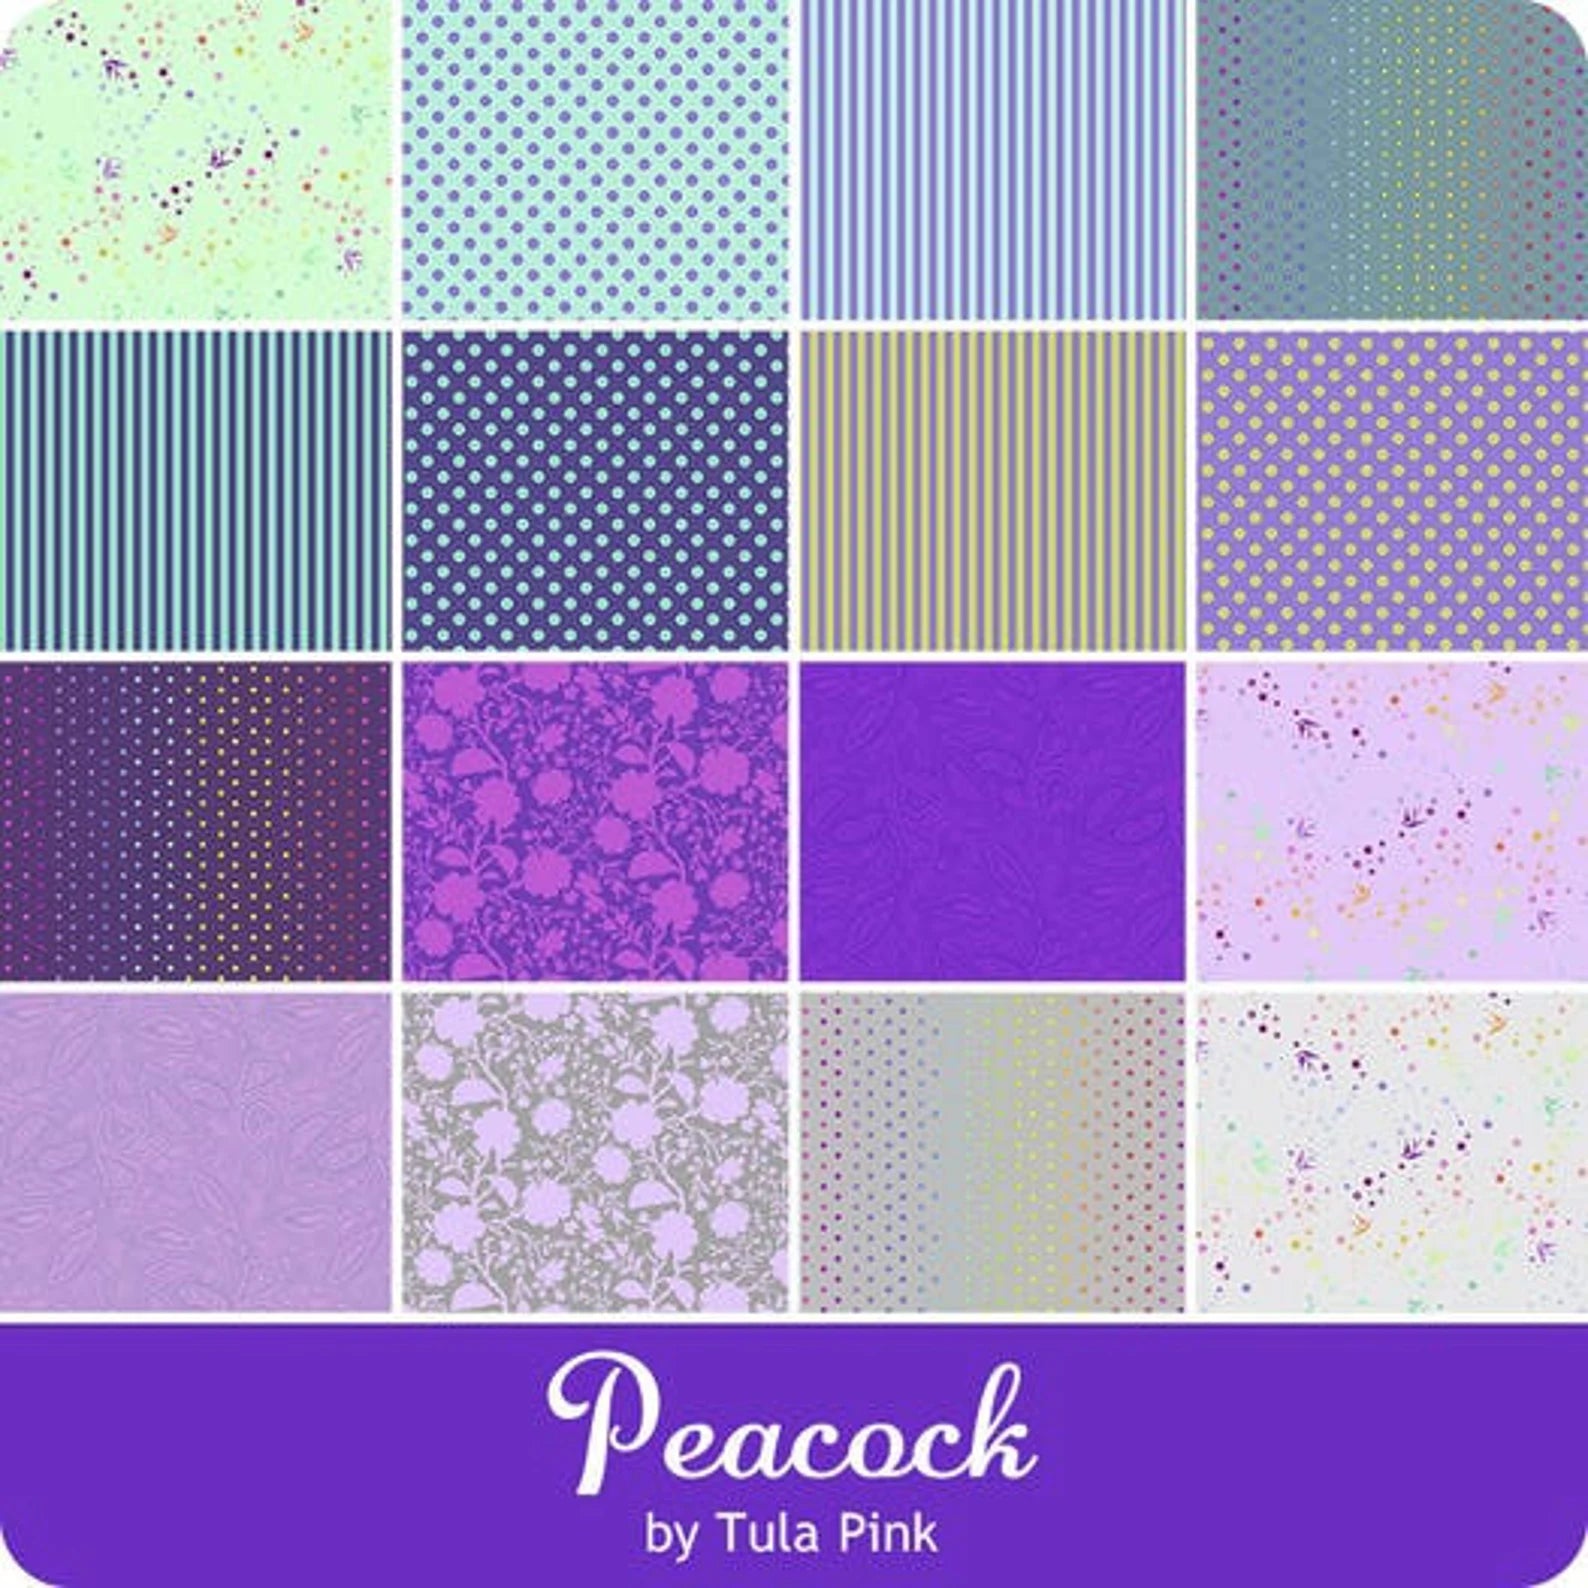 Fabric colour chart Peacock colourway - Pink  purple magenta teal blue grey Tula pink fat quarter fq fabric stack  fabrics from here True Colours colors fabric line available at 2 sew textiles art quilt supplies